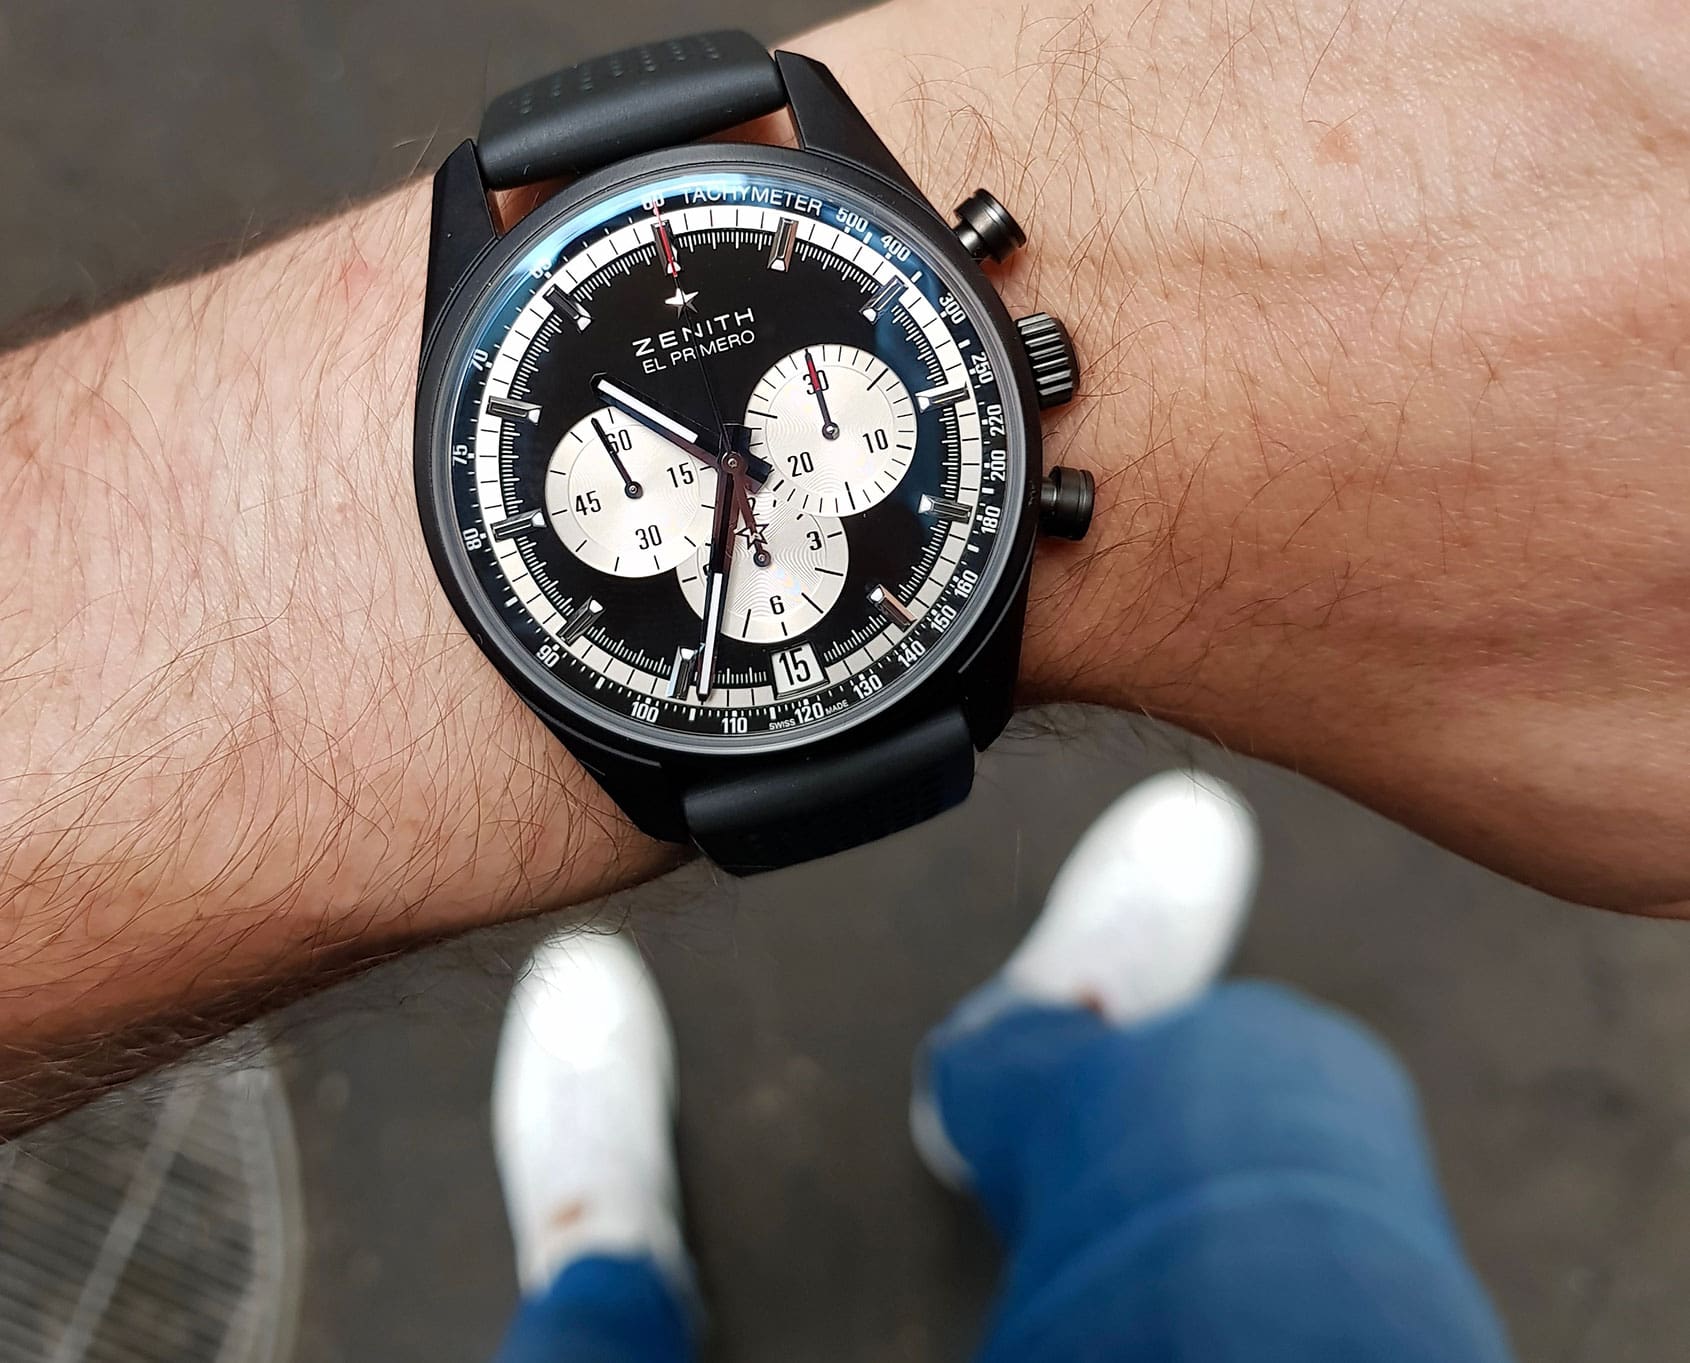 SPOTTED BY AG: Dispatch 15, December 17 – Holiday watchspotting edition